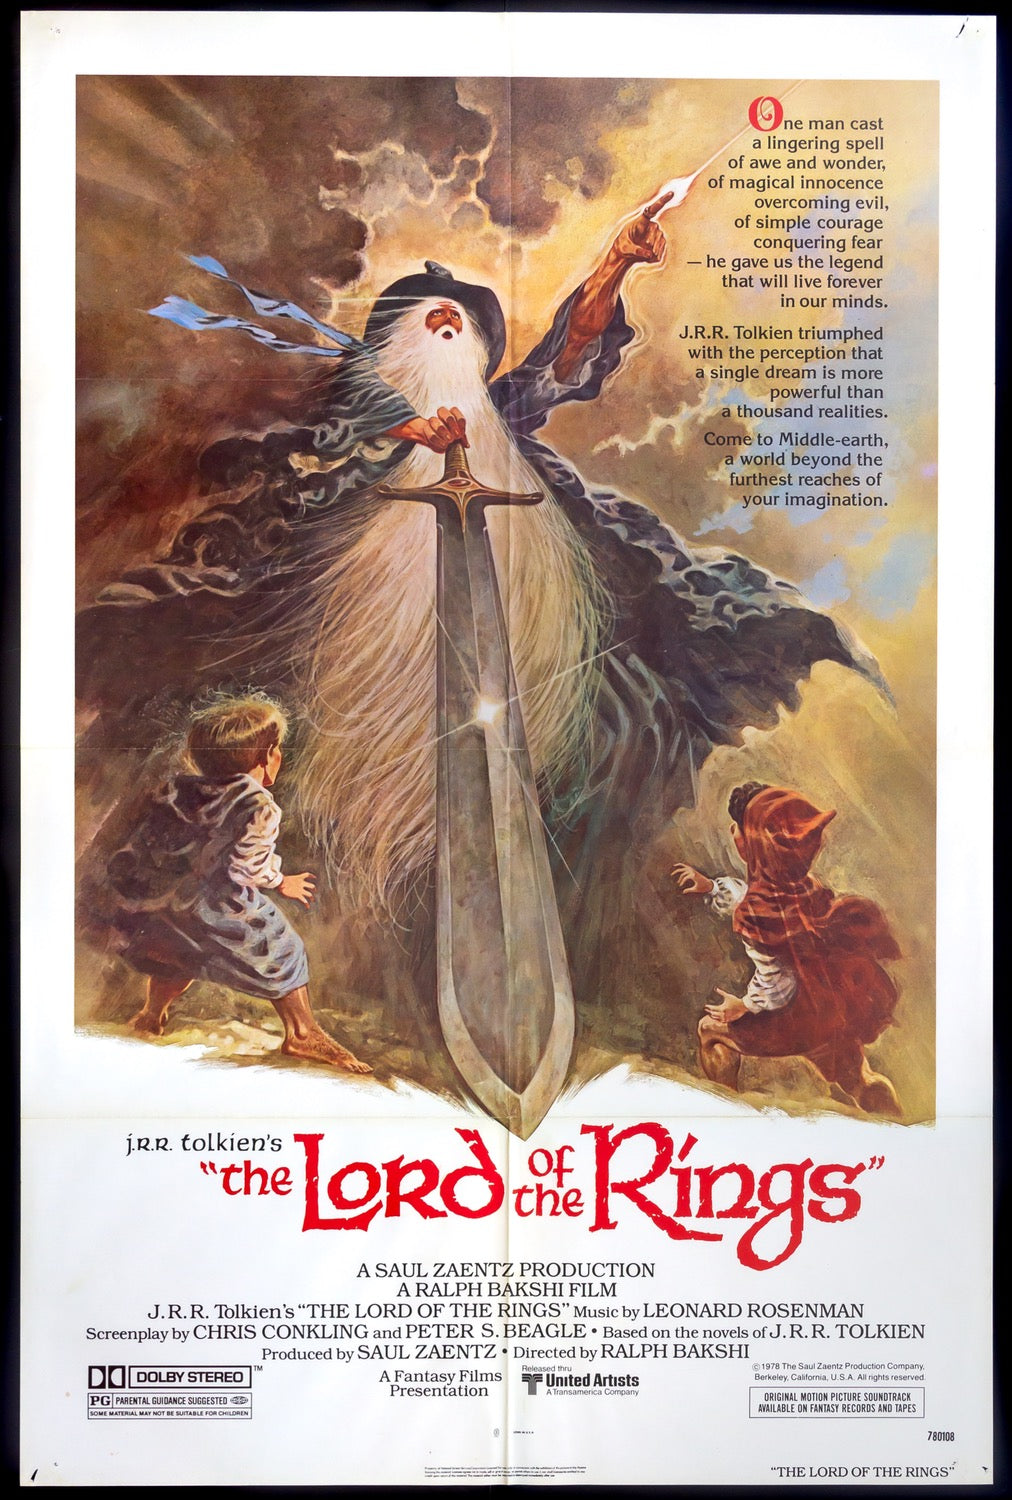 Lord of the Rings (1978) original movie poster for sale at Original Film Art